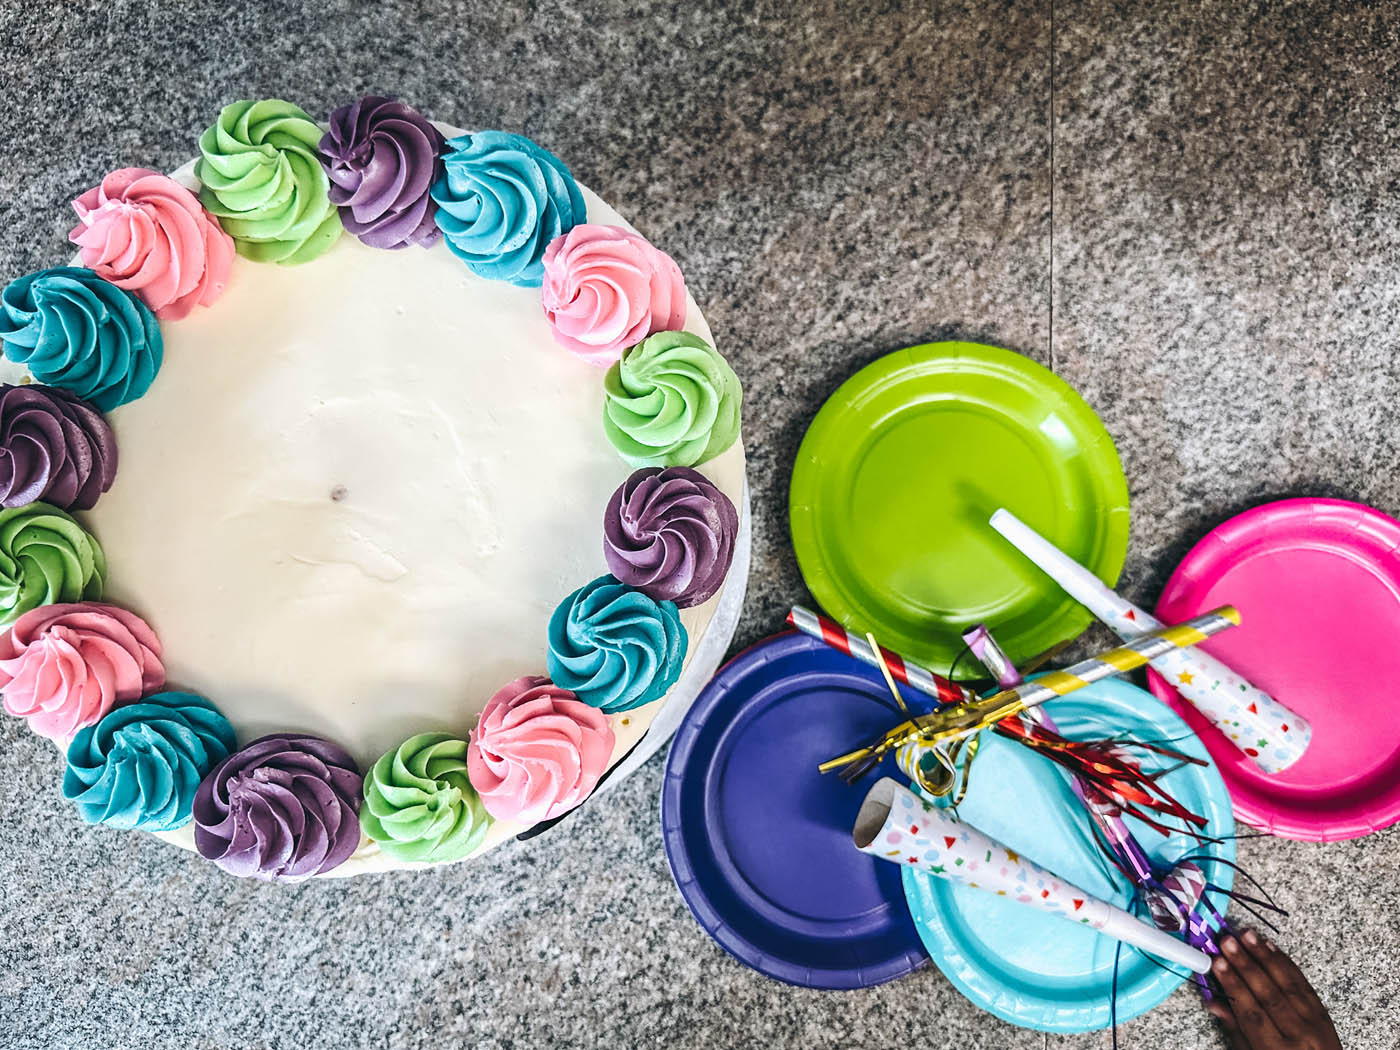 A cake and party supplies - party utensil supplies provided at Romp n' Roll toddler birthday venues in Katy, TX.